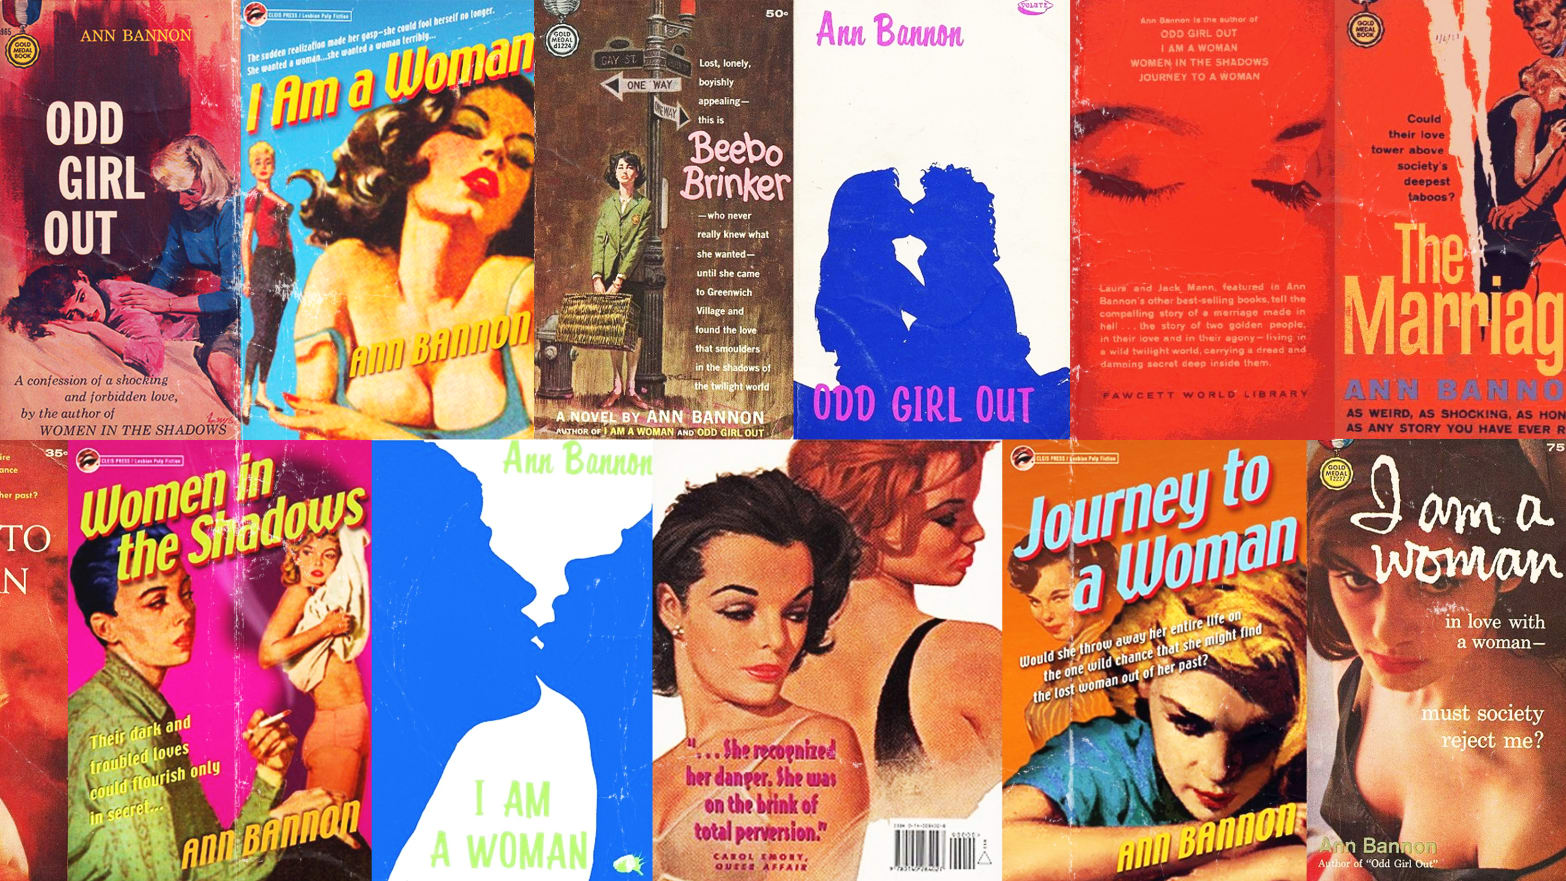 Ann Bannon, the Queen of Lesbian Pulp Fiction, Reveals Her Own Amazing Story